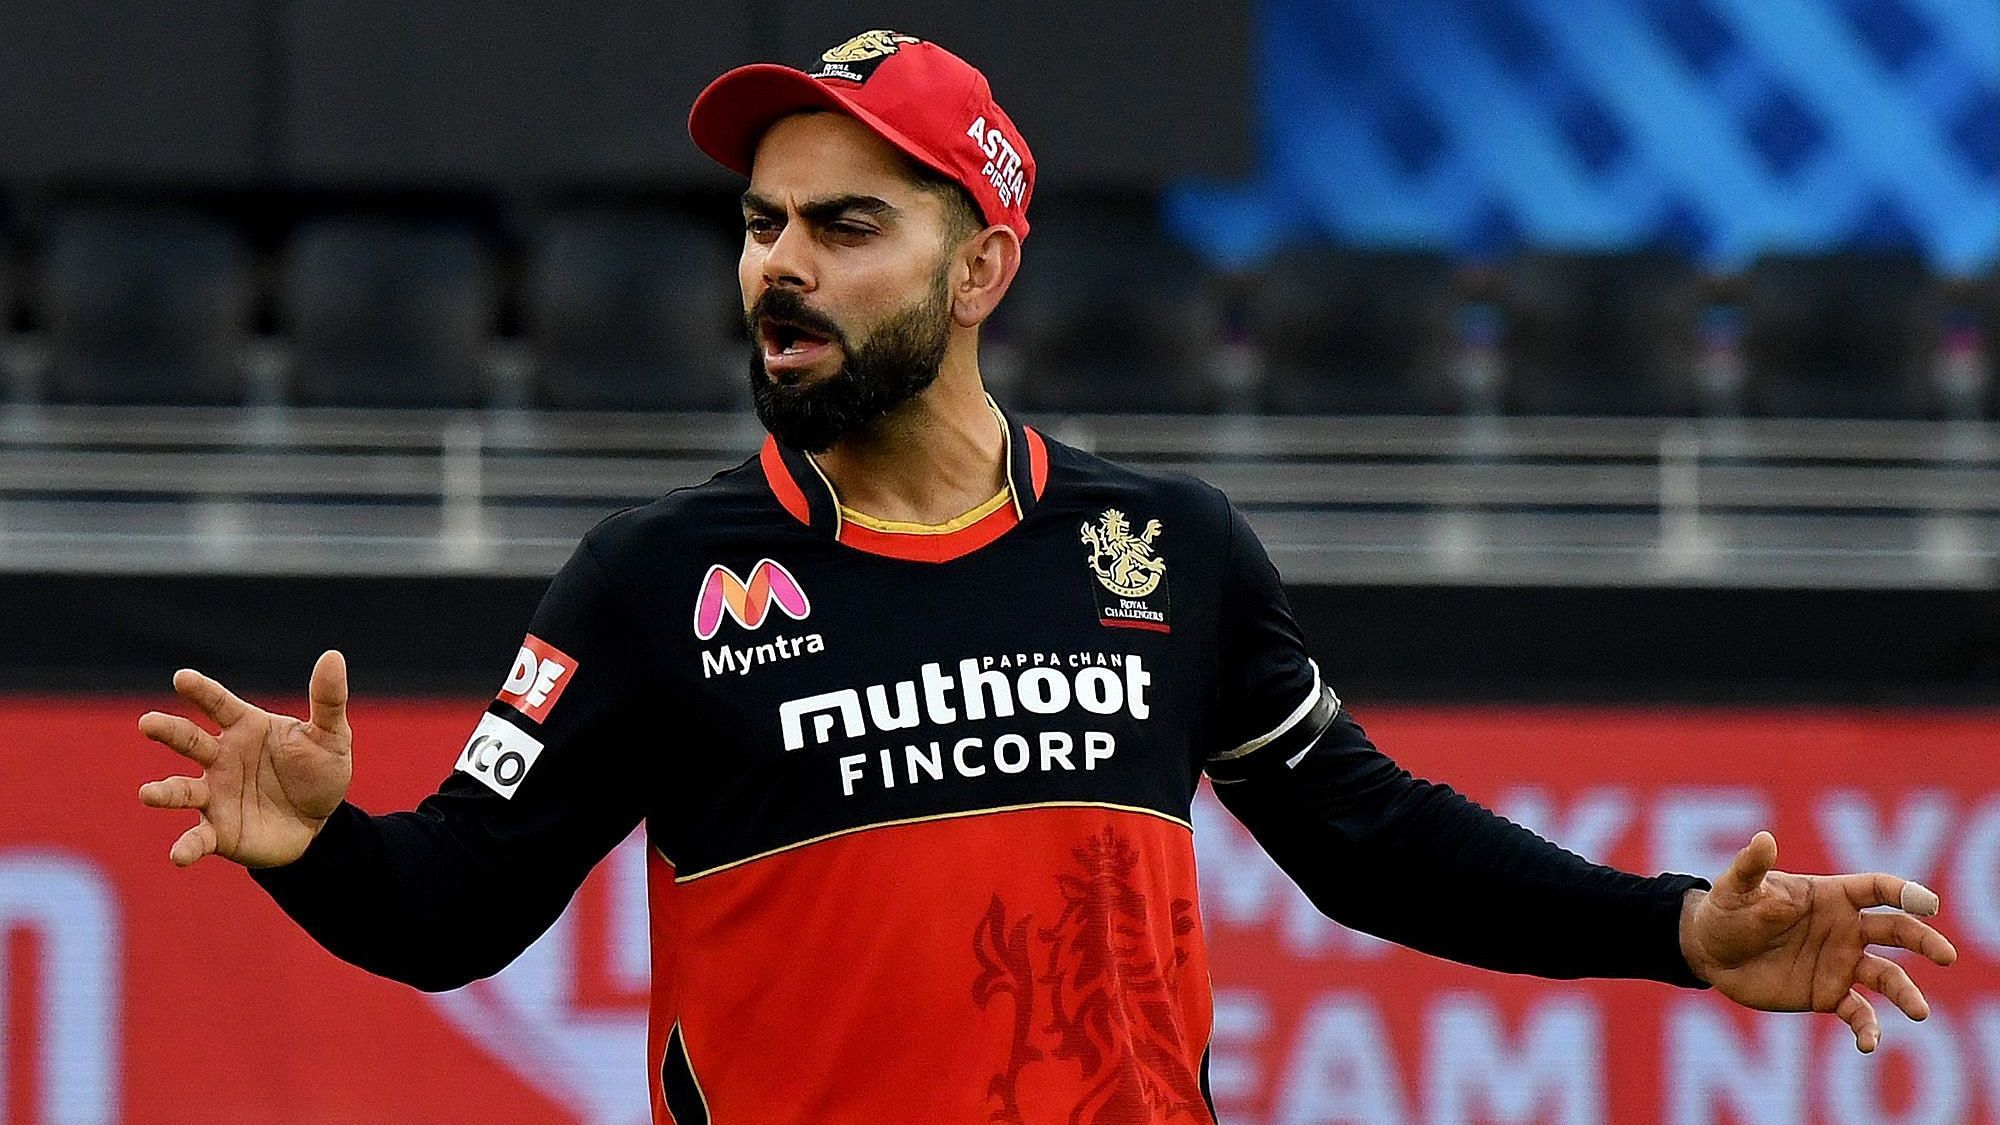 Royal Challengers Bangalore skipper Virat Kohli was fined with Rs. 12 Lakh after found guilty of minimum over-rate offence.